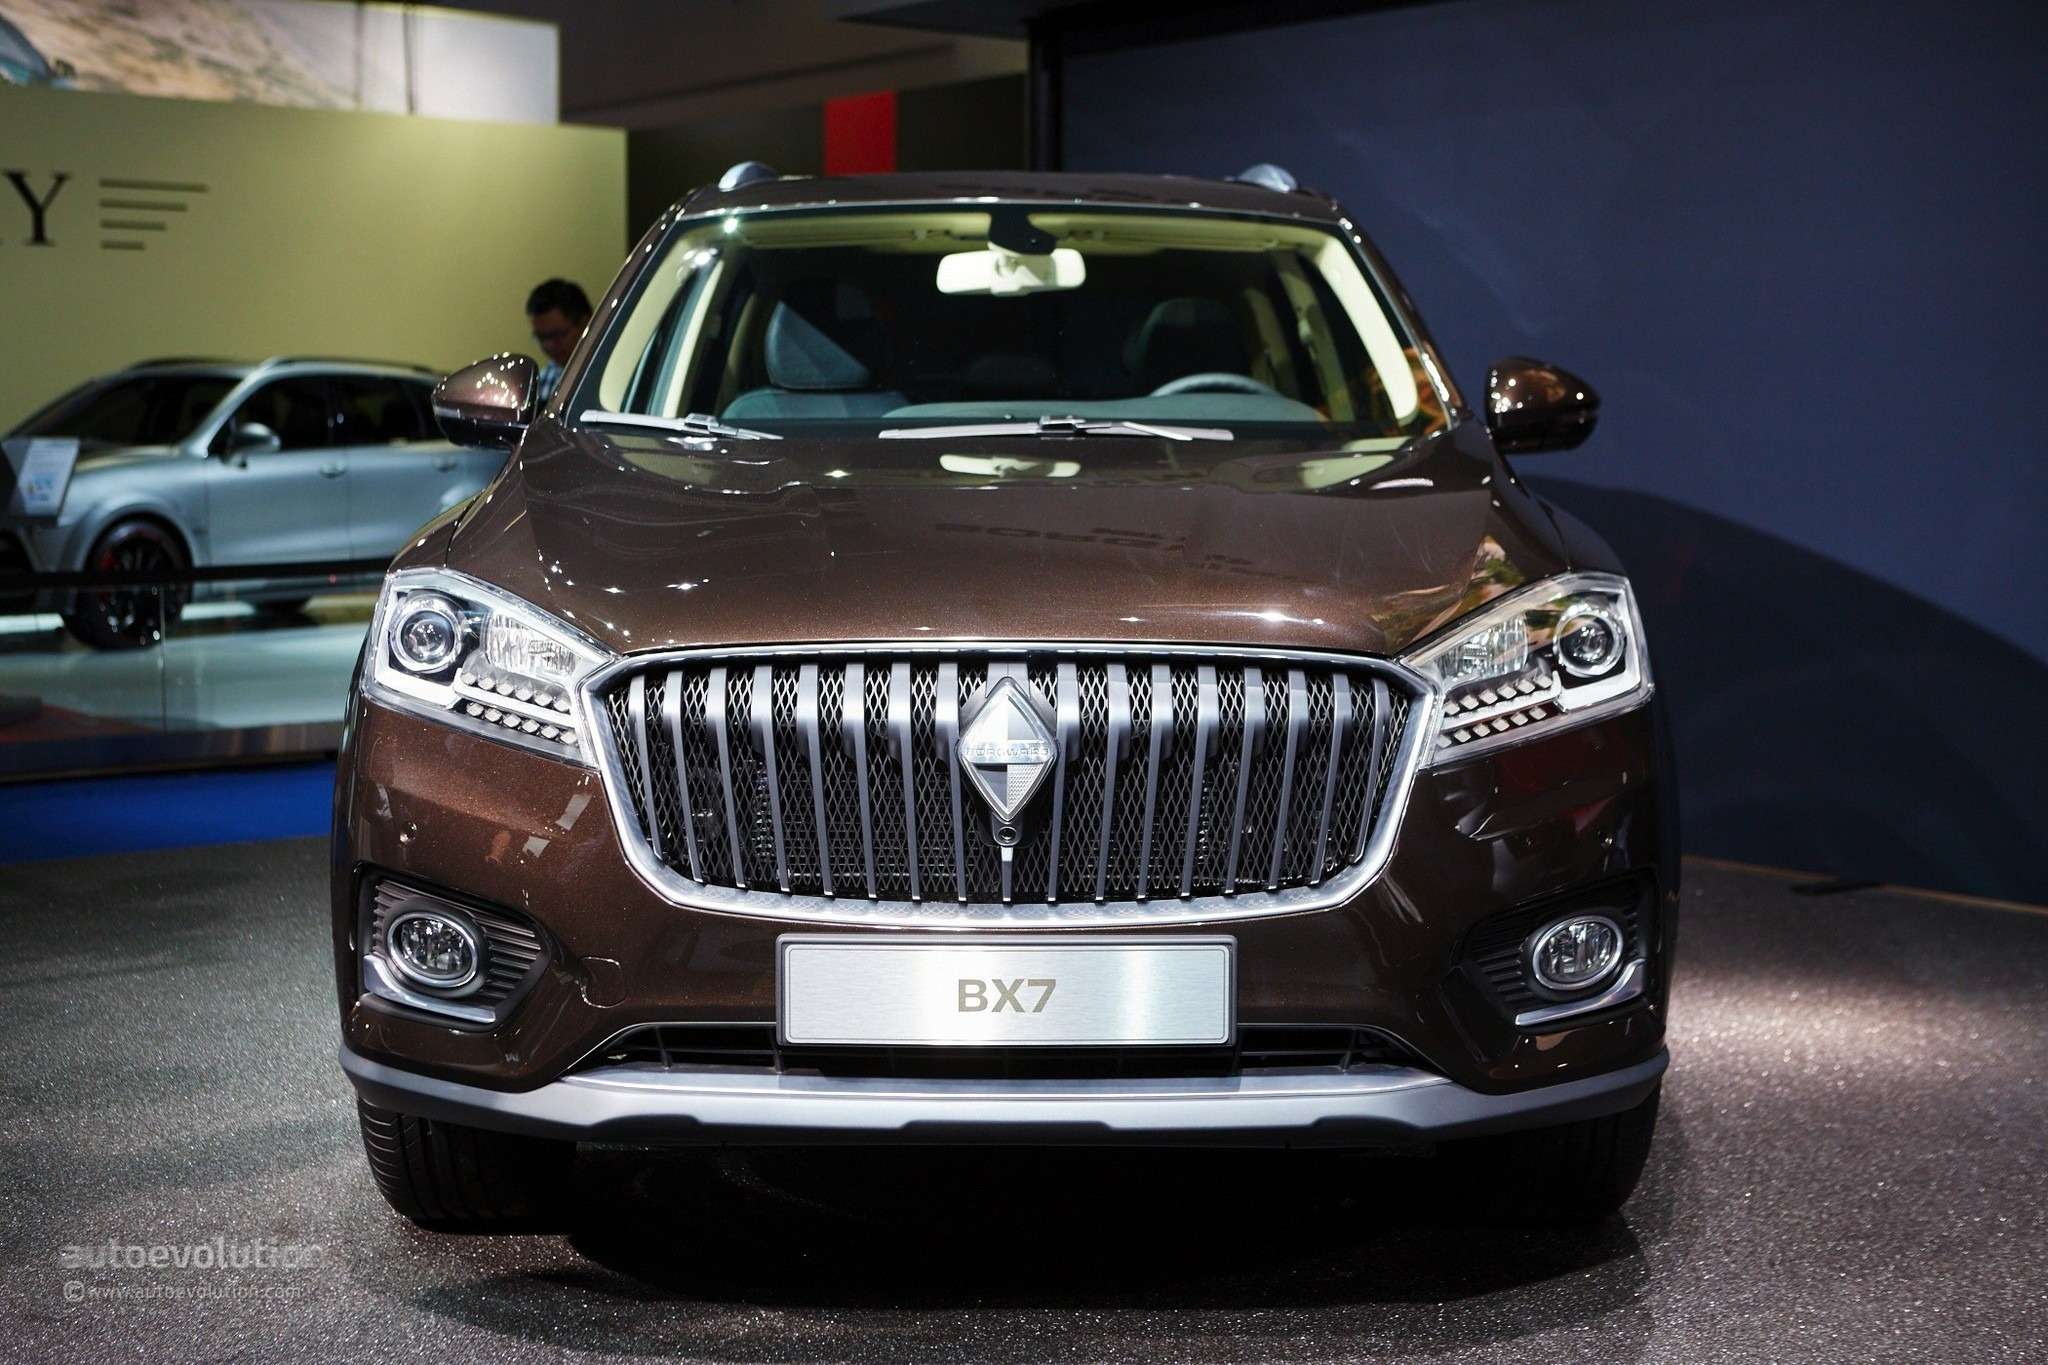 borgward-is-officially-back-with-its-bx7-suv-in-frankfurt-live-photos_15